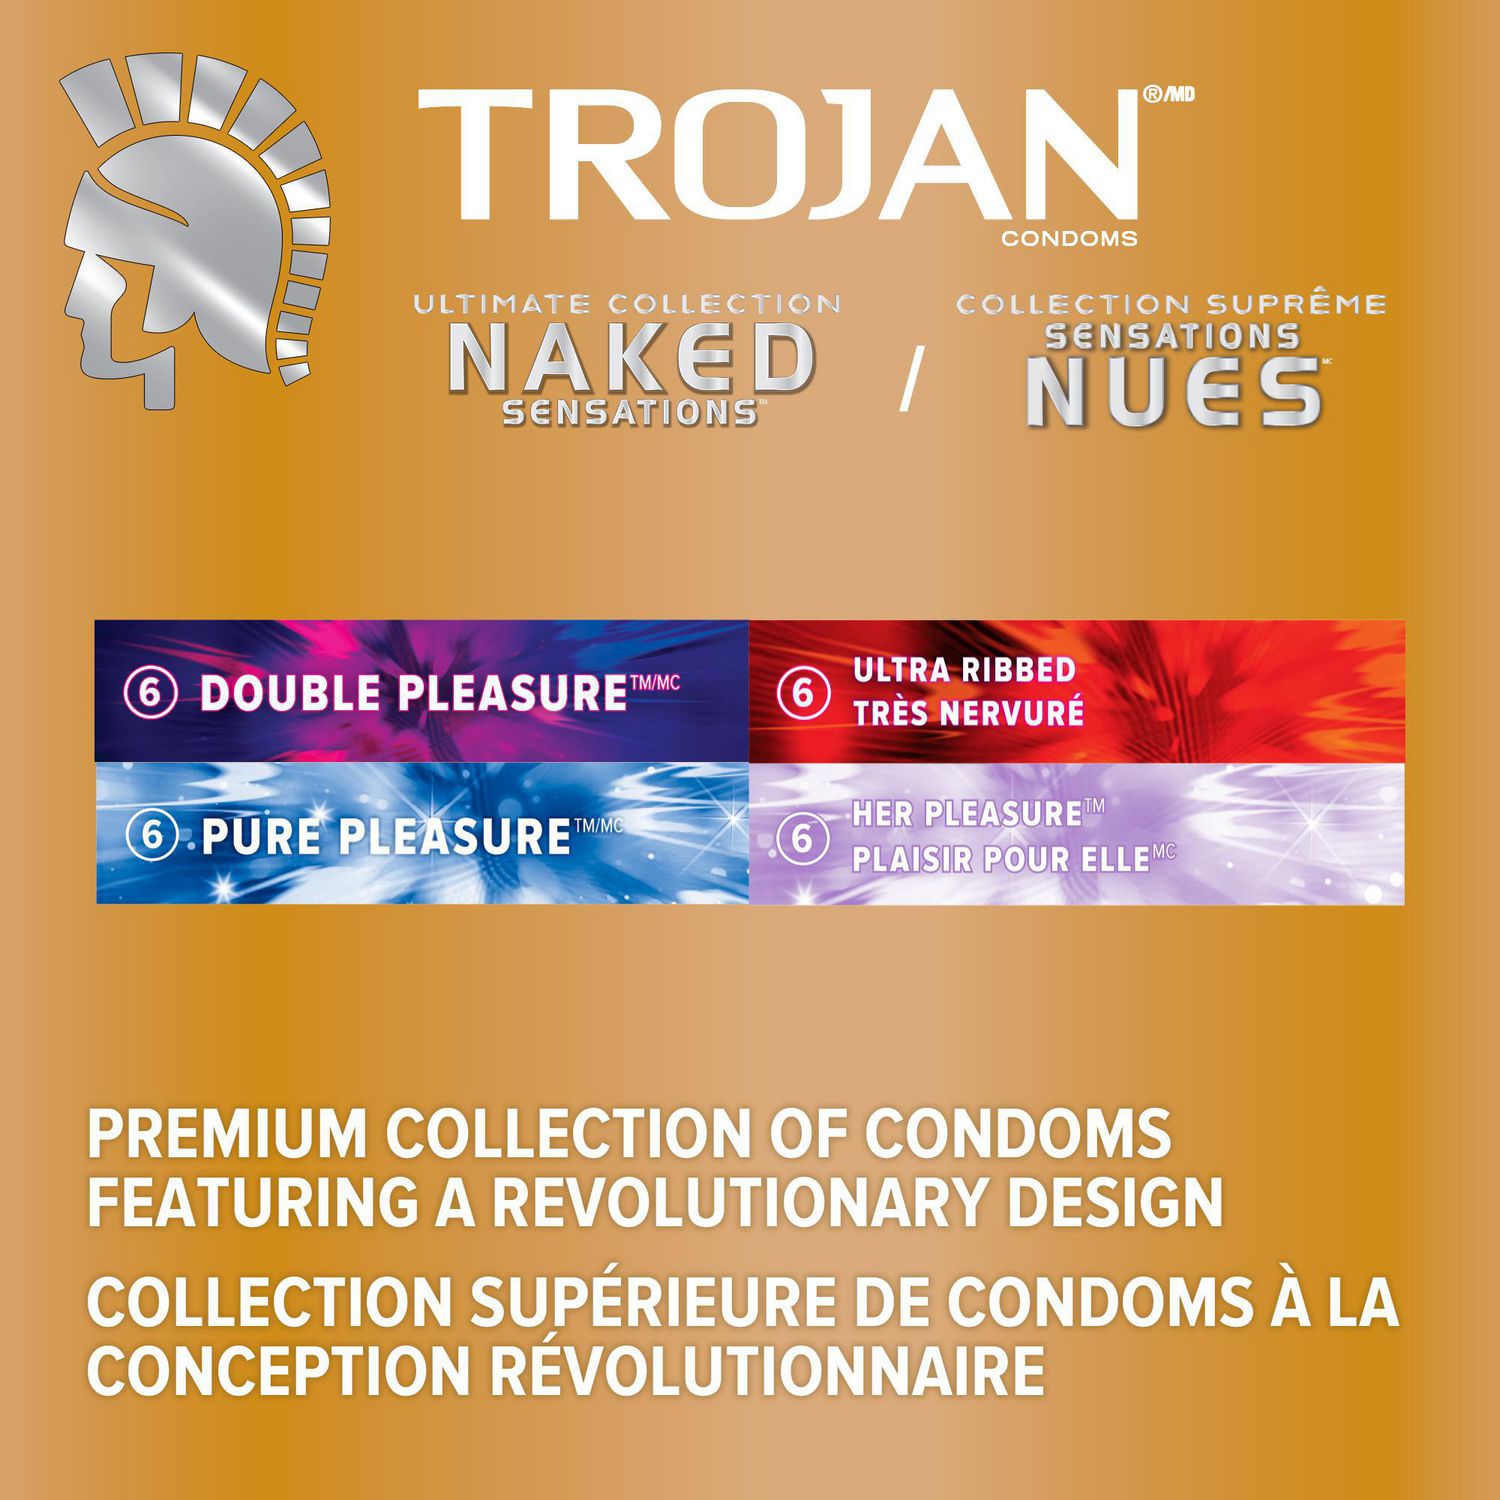 Trojan Naked Sensations Ultimate Collection Variety Pack Lubricated  Condoms, 24 Lubricated Latex Condoms